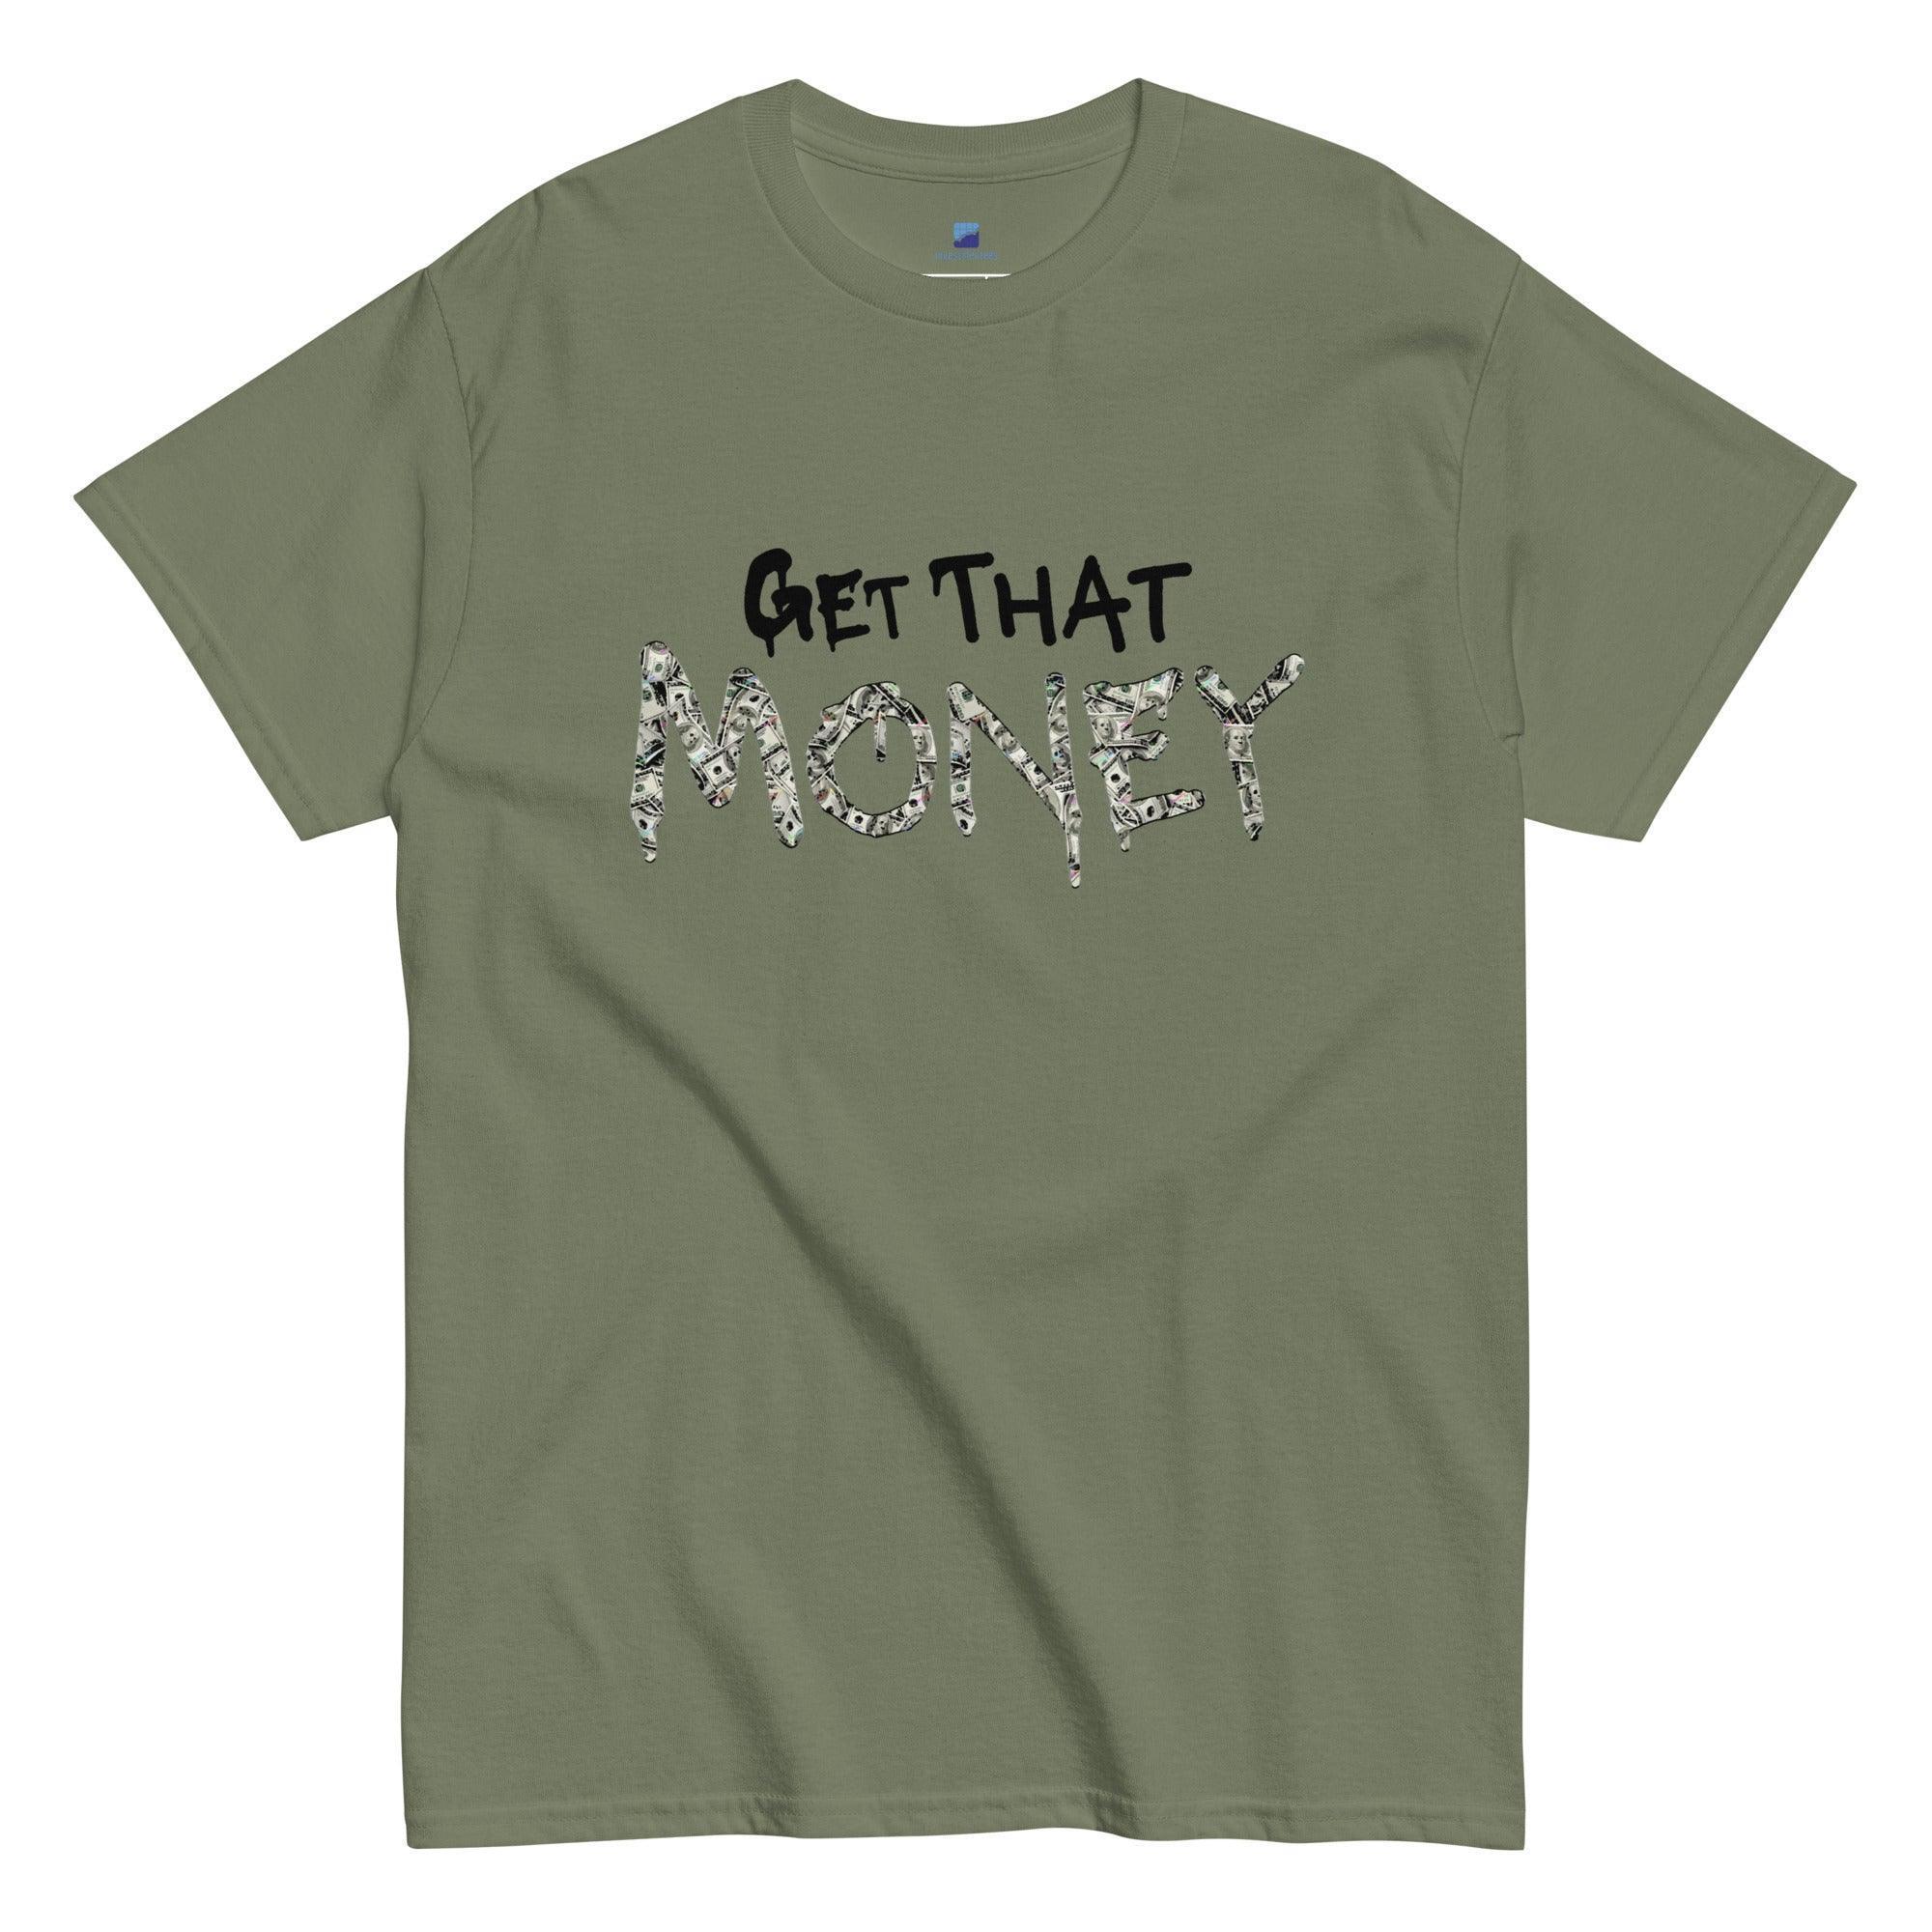 Get That Money T-Shirt - InvestmenTees